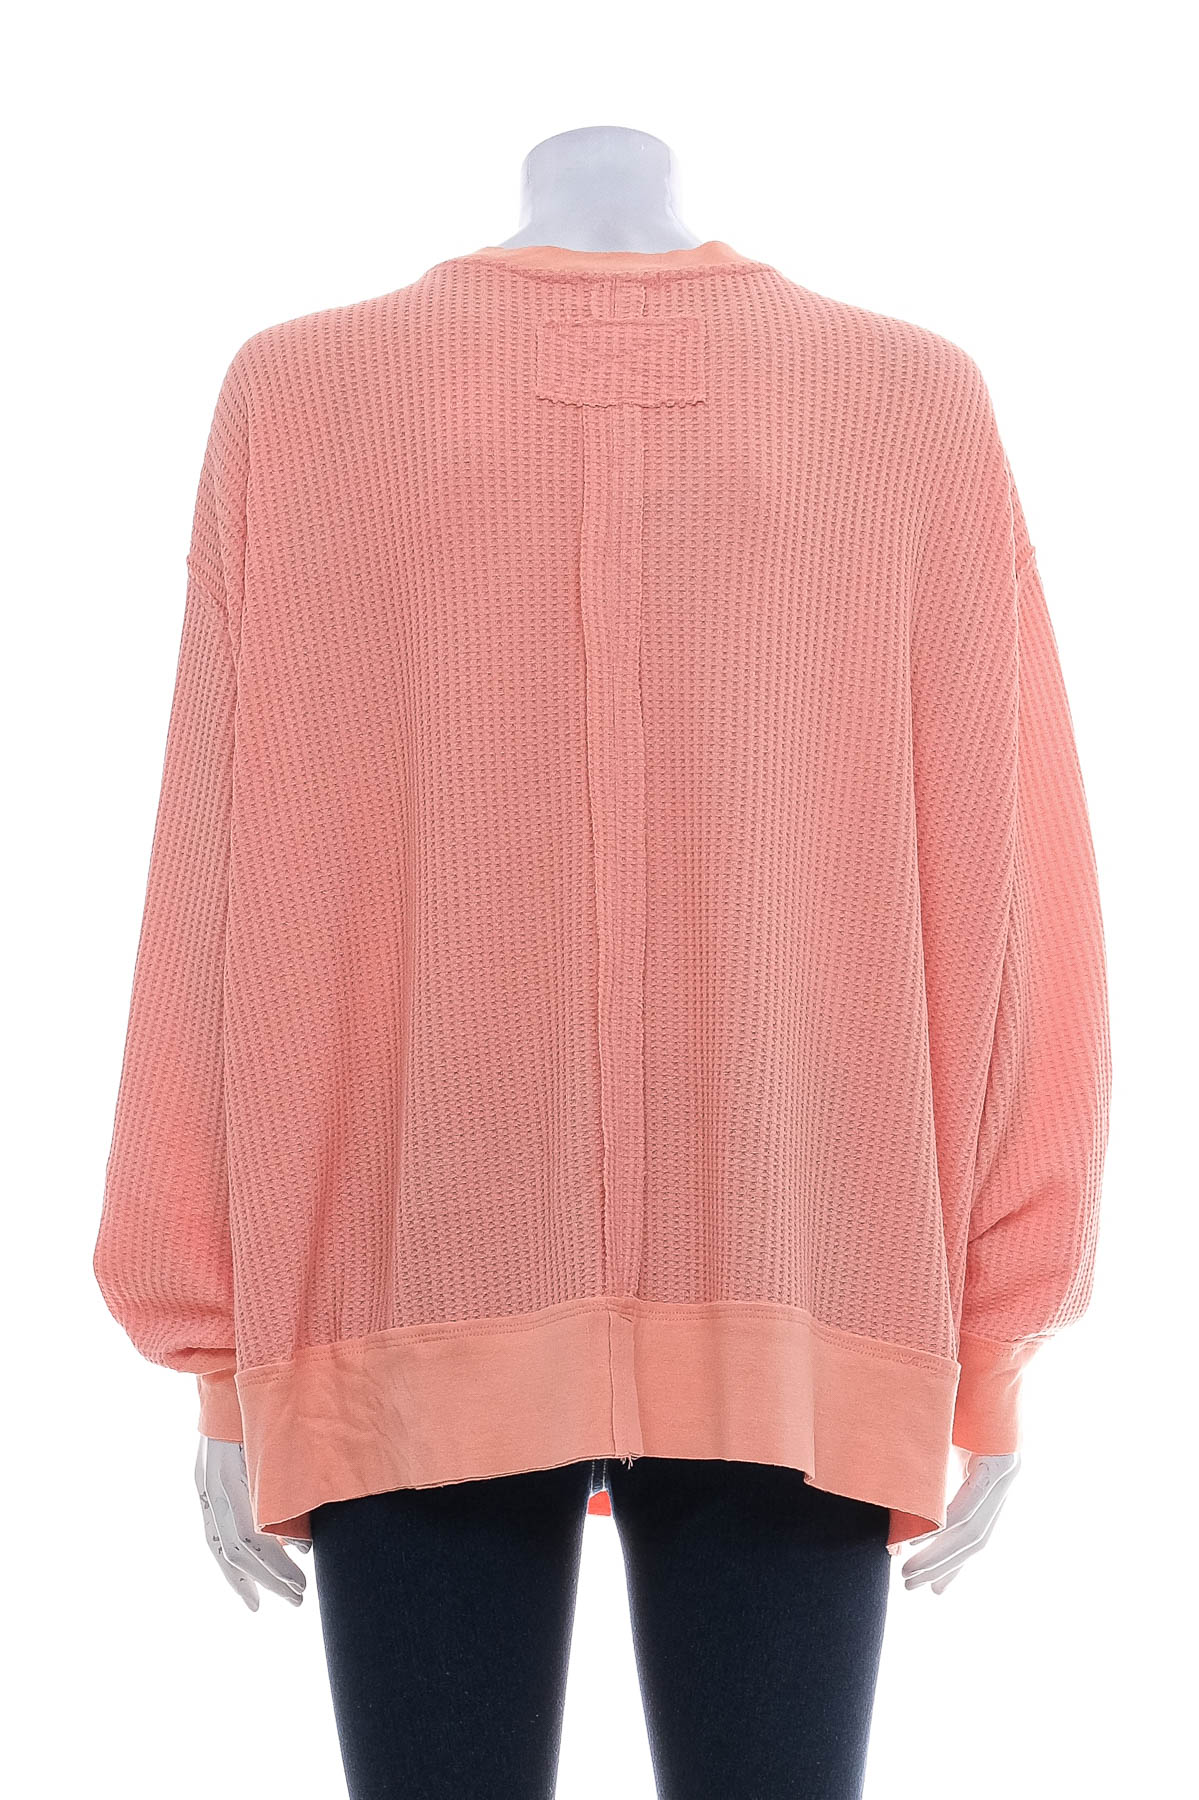 Women's blouse - Pink Lily - 1